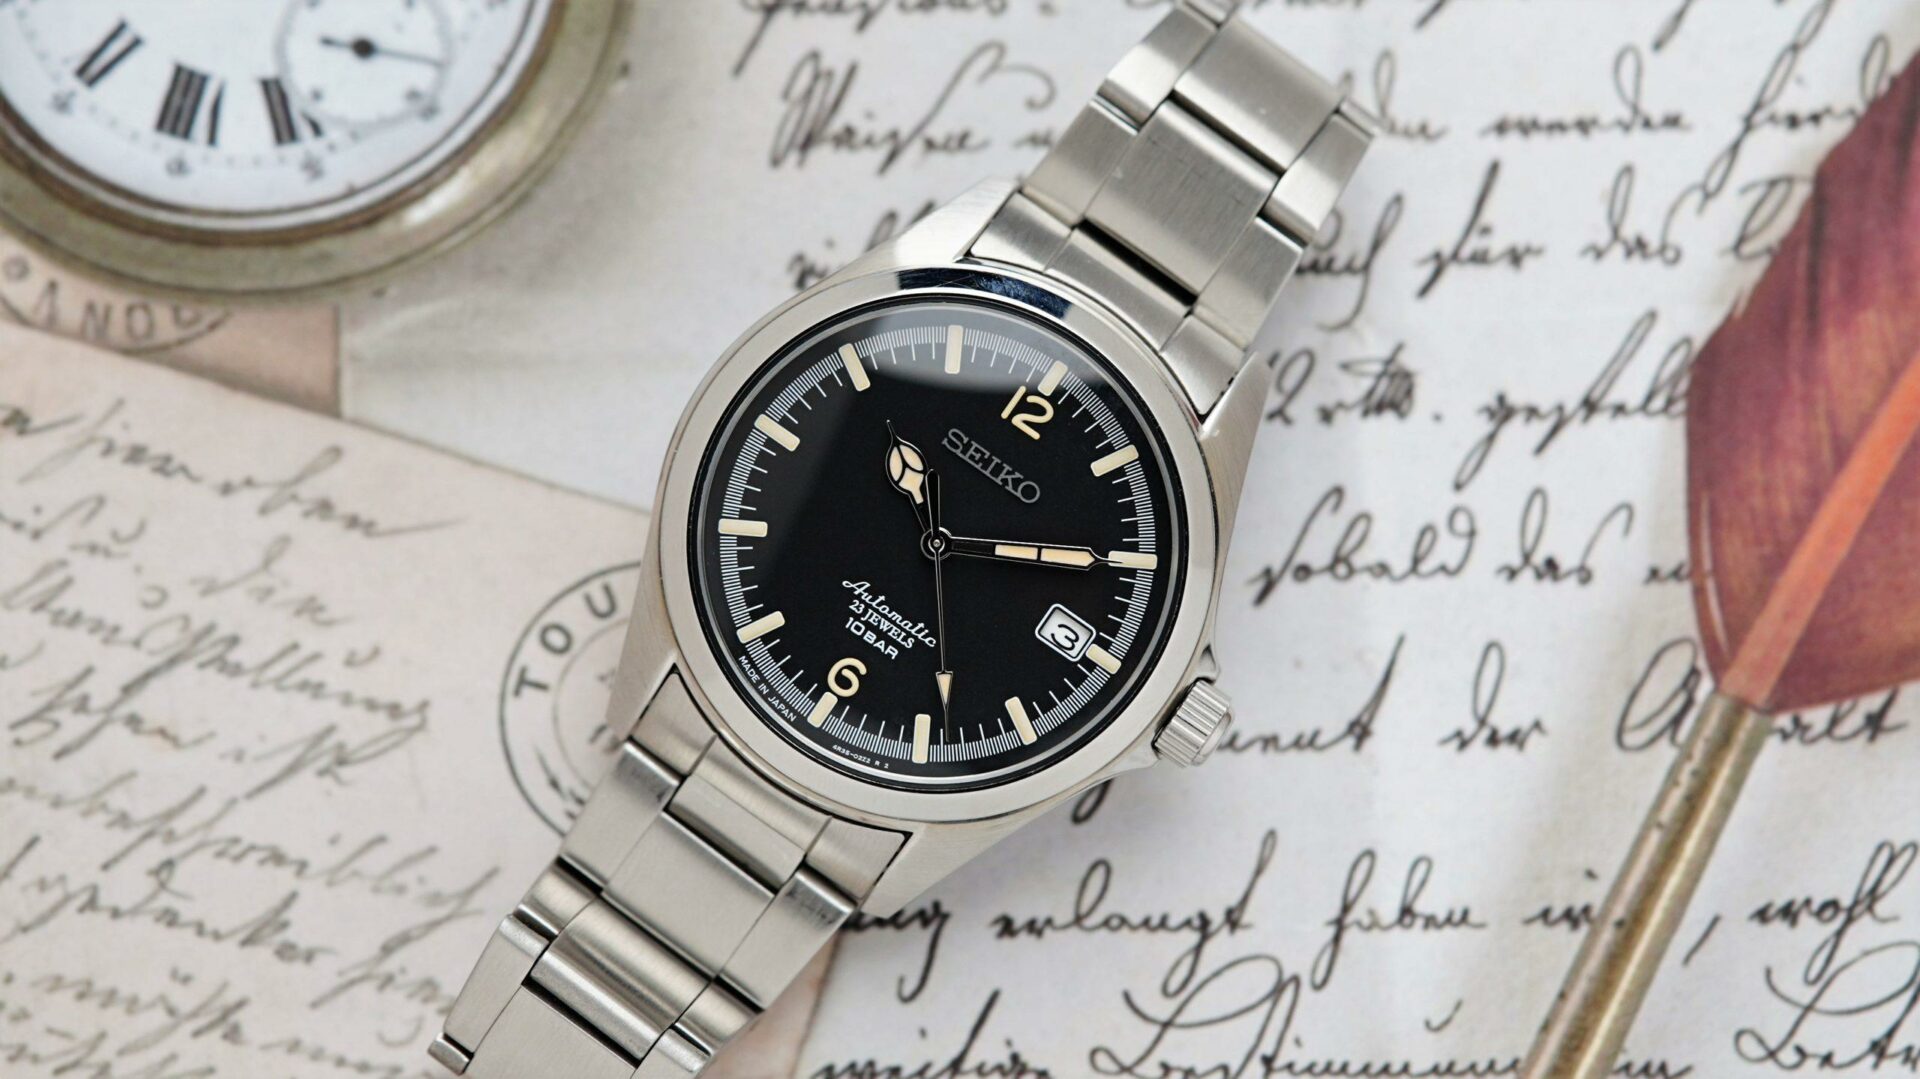 Seiko Explorer 1016 Limited Edition featured with feather in background.